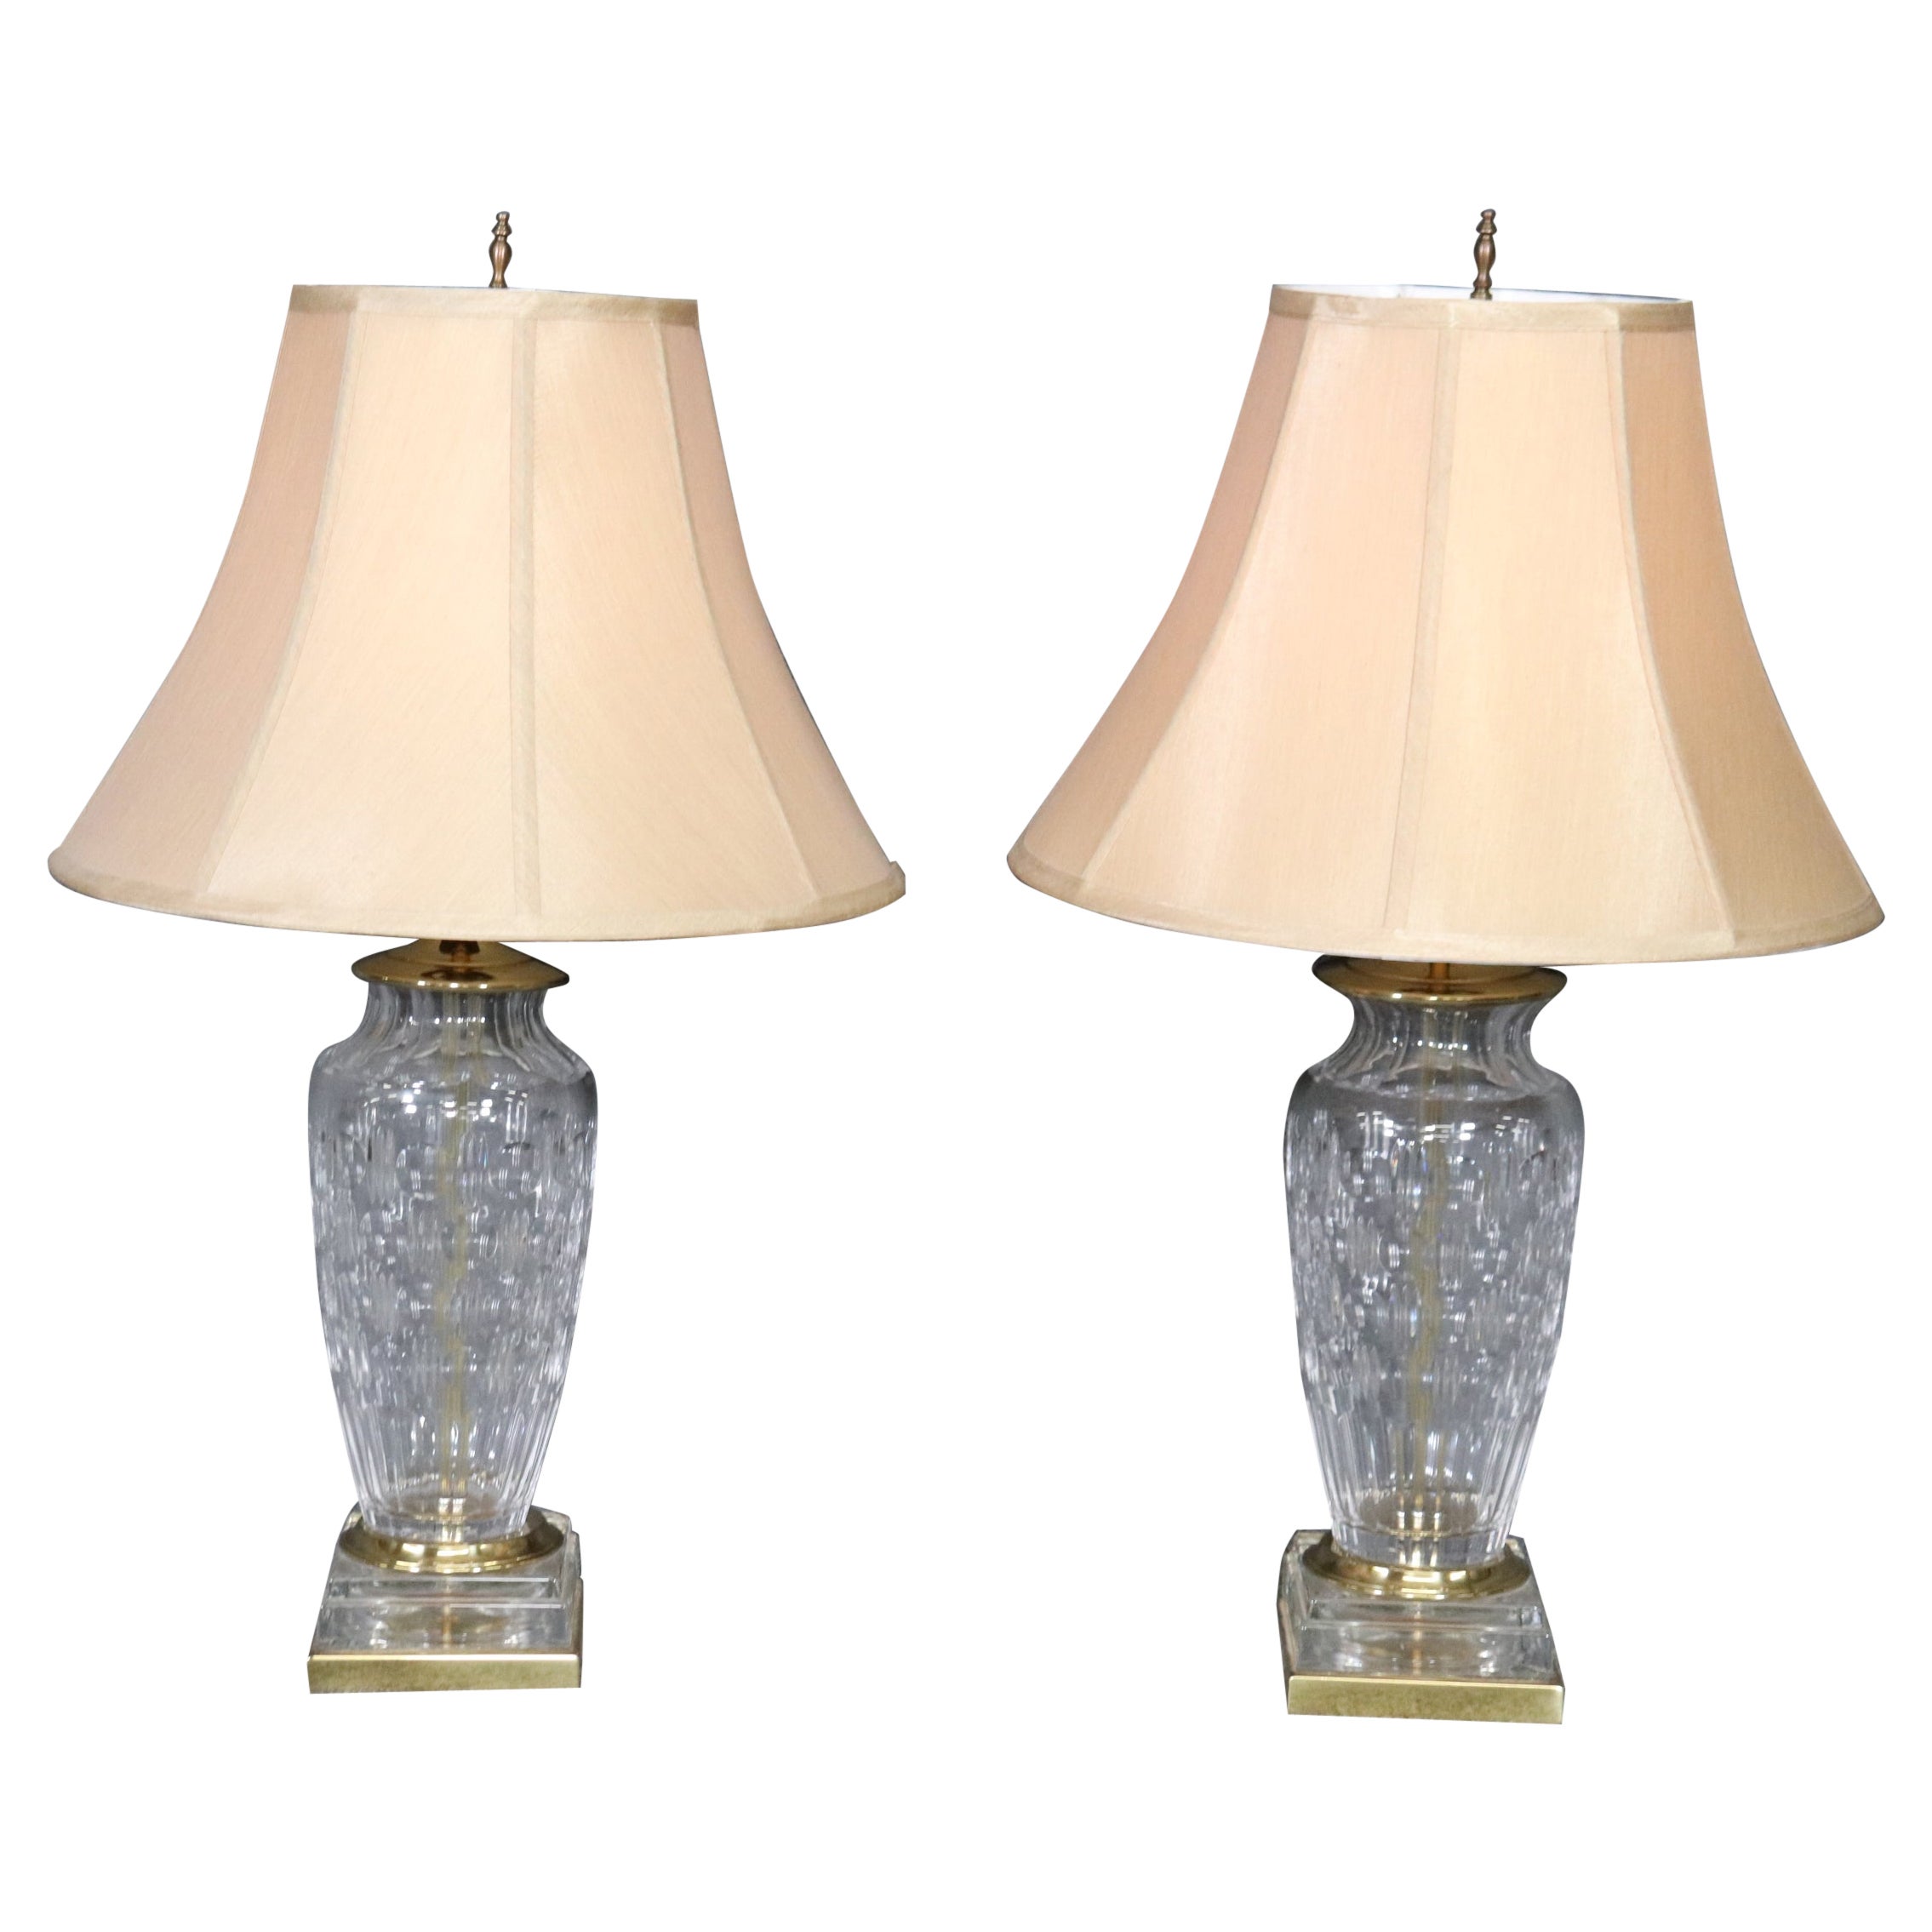 Pair of Crystal and Brass Lamps Attributed to Waterford